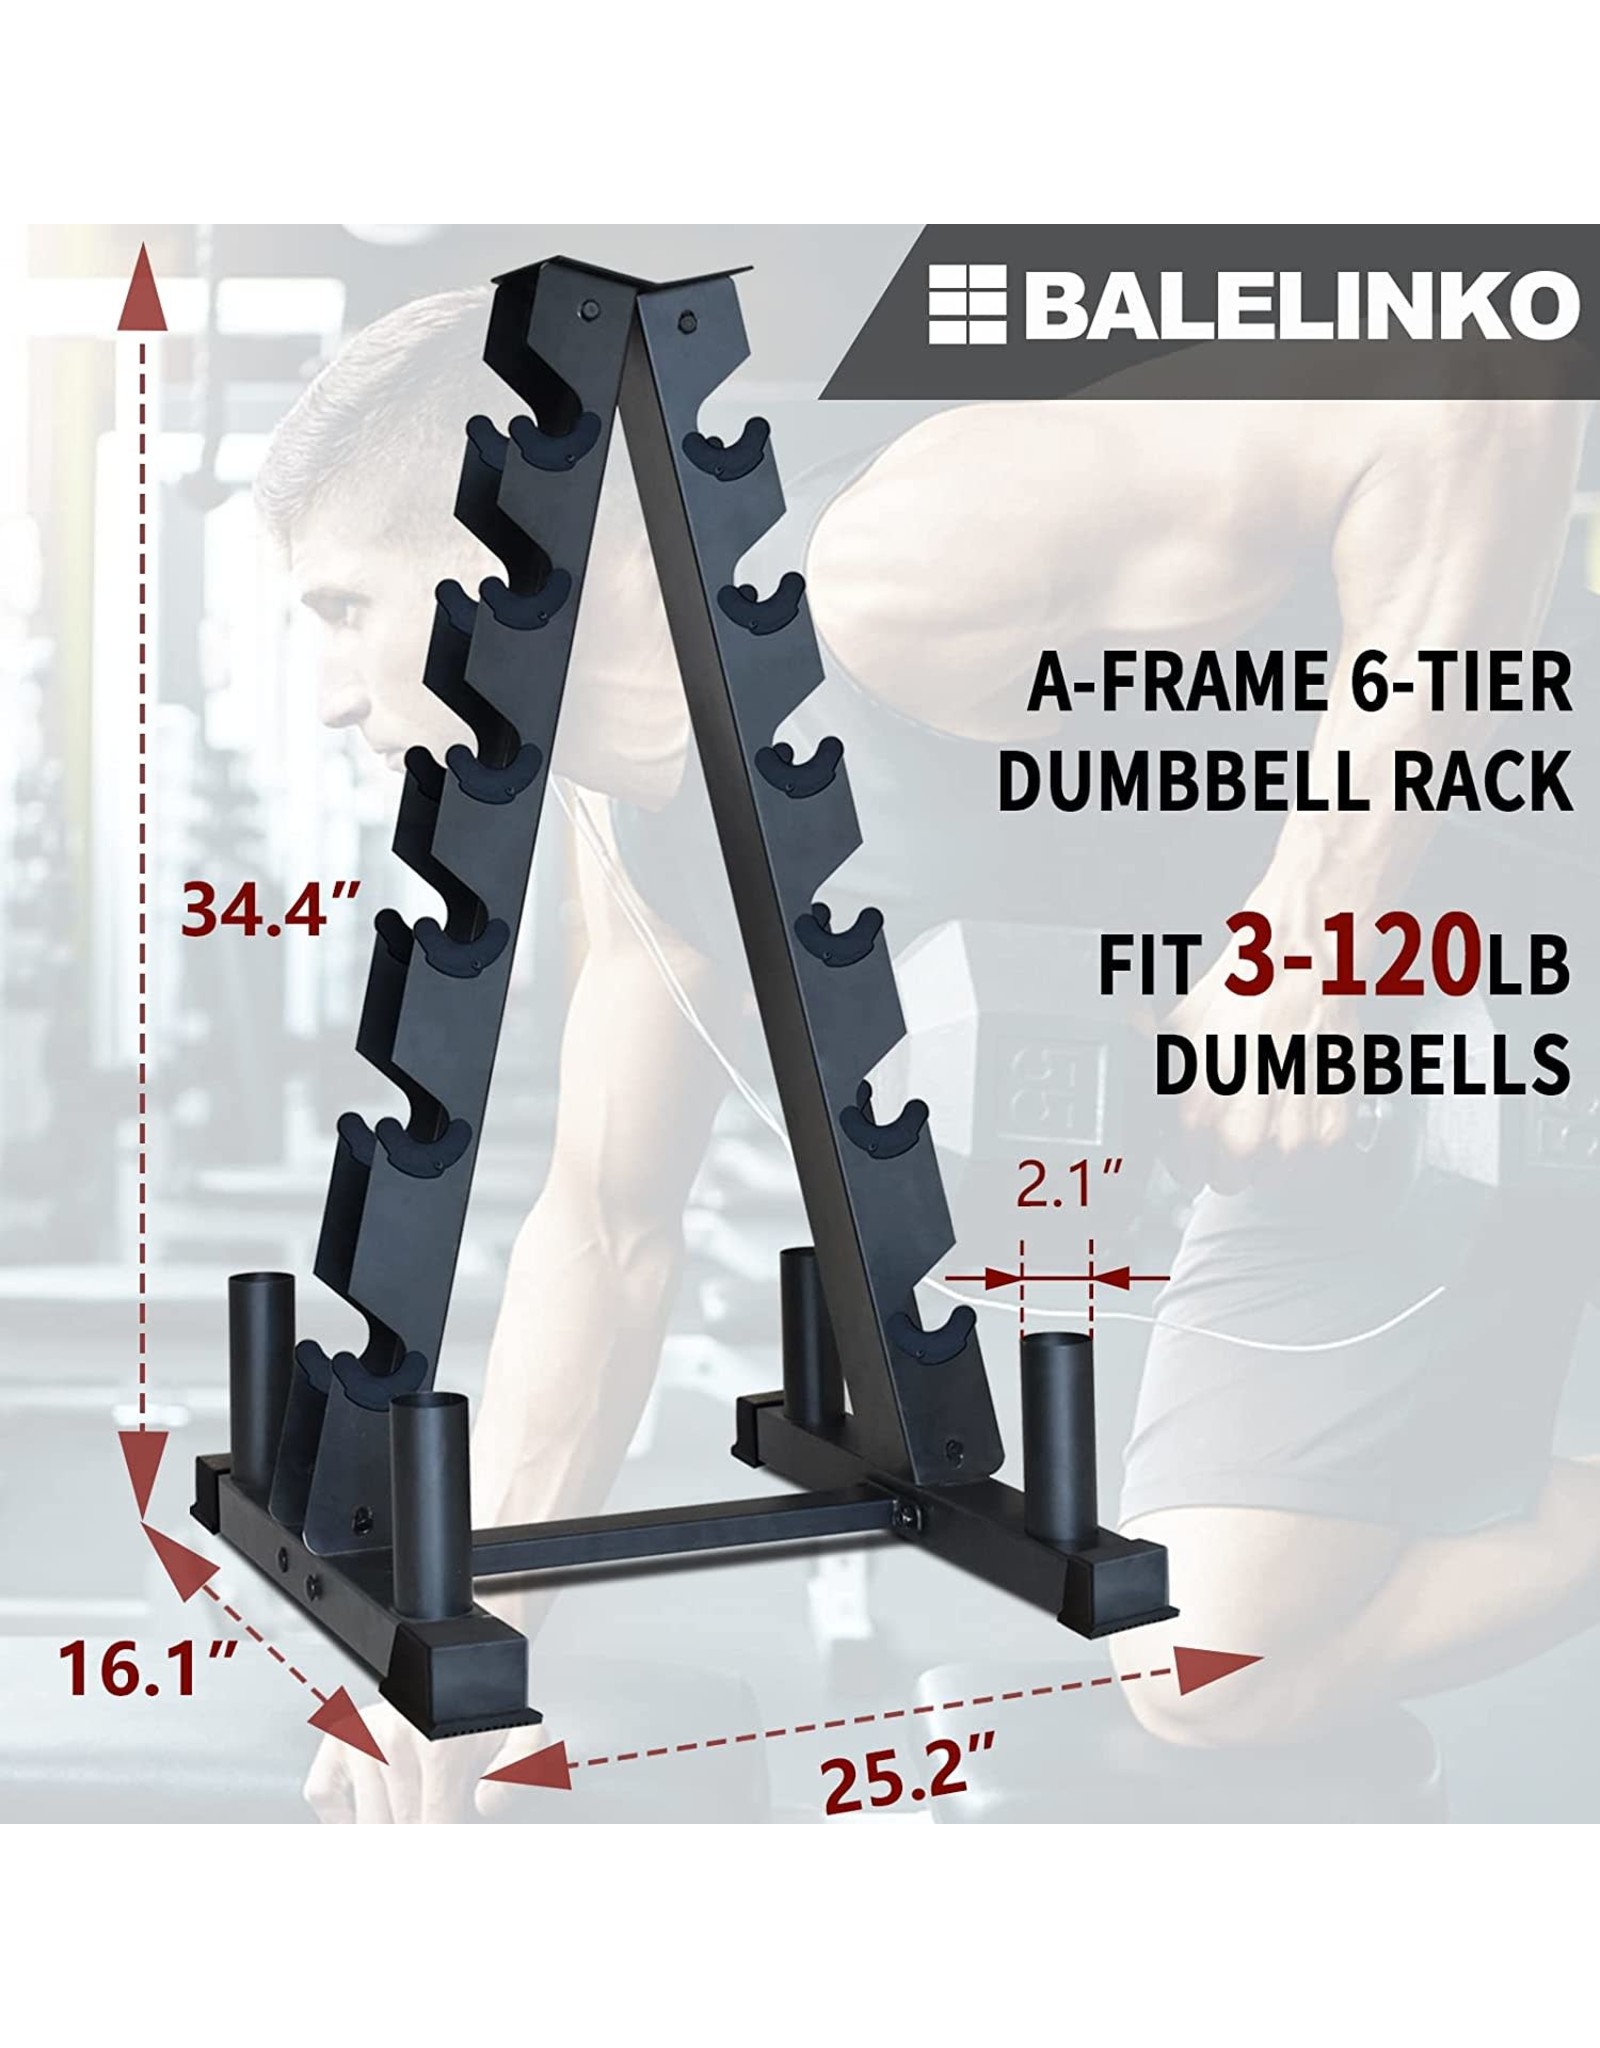 800 lbs Weight Capacity Storage Stand for Home Gym Dumbbell Storage Balelinko 6-Tier Heavy Duty A-Frame Dumbbell Storage Weight Rack with 4 Barbell Storage Holders for 1 & 2 Olympic Bars 